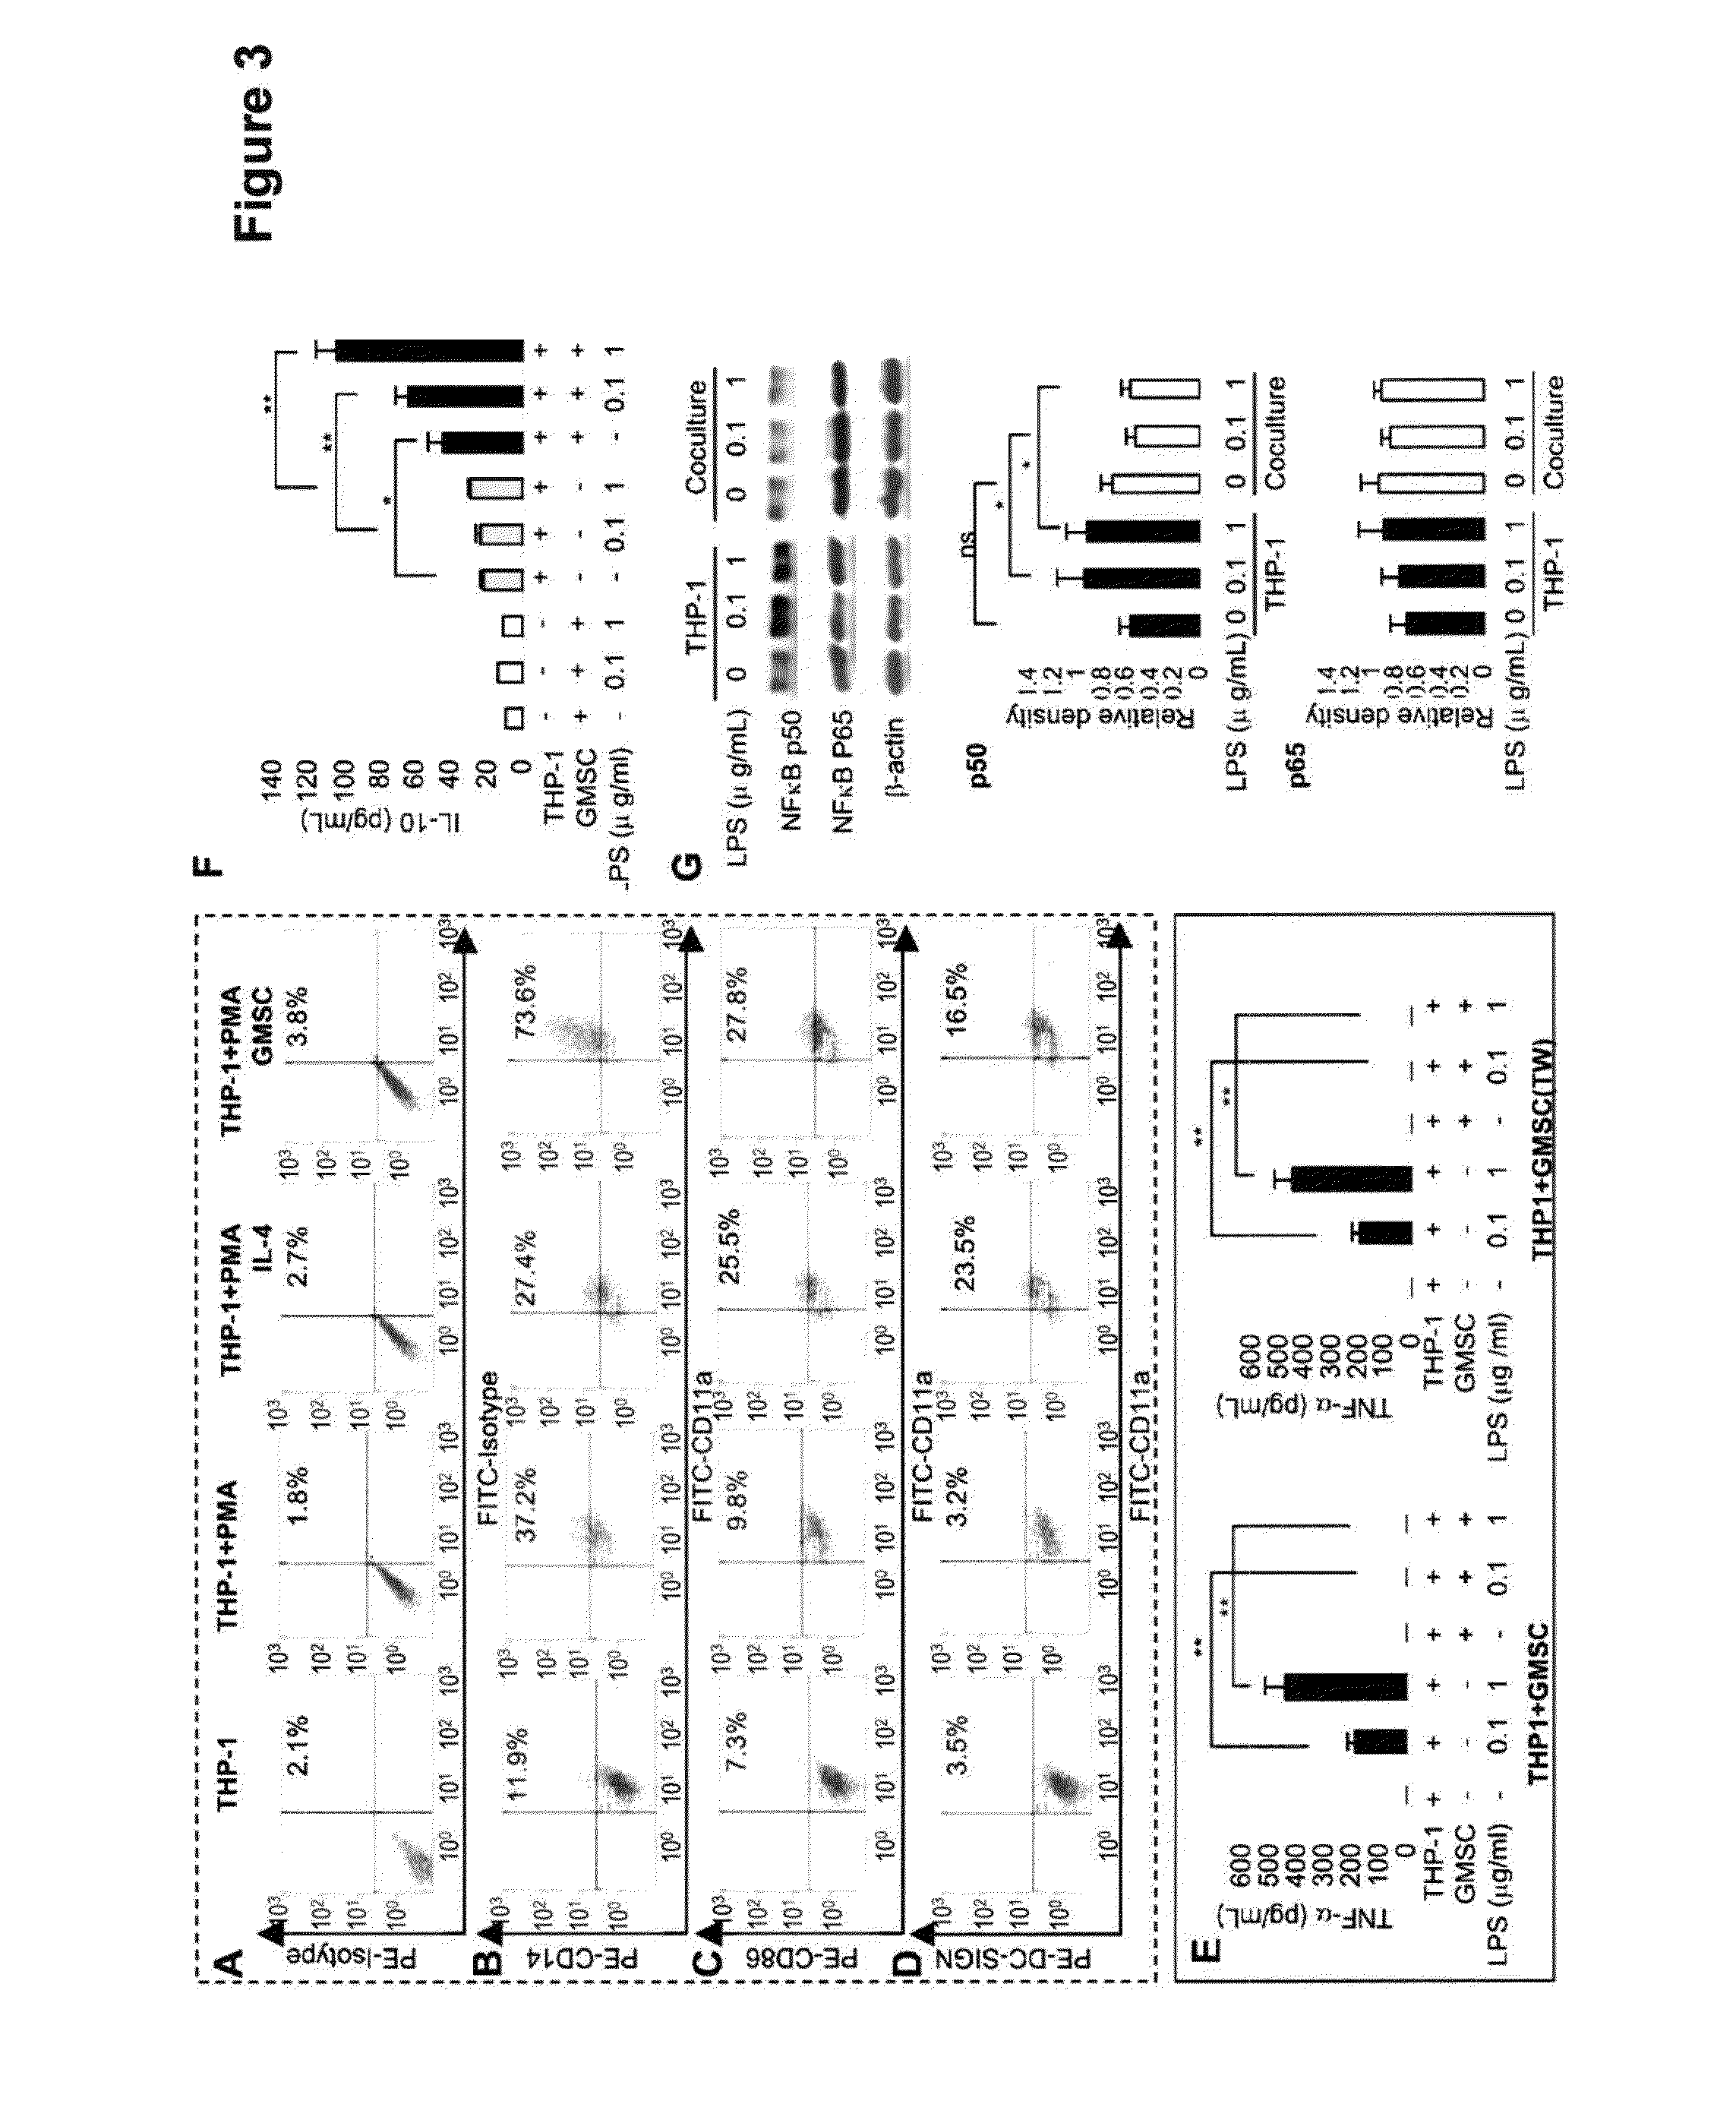 Pharmaceutical Compositions Comprising Gingiva A-Derived Mesenchymal Stem Cells and Methods of Treating Inflammation, Wound Healing and Contact Hypersensitivity